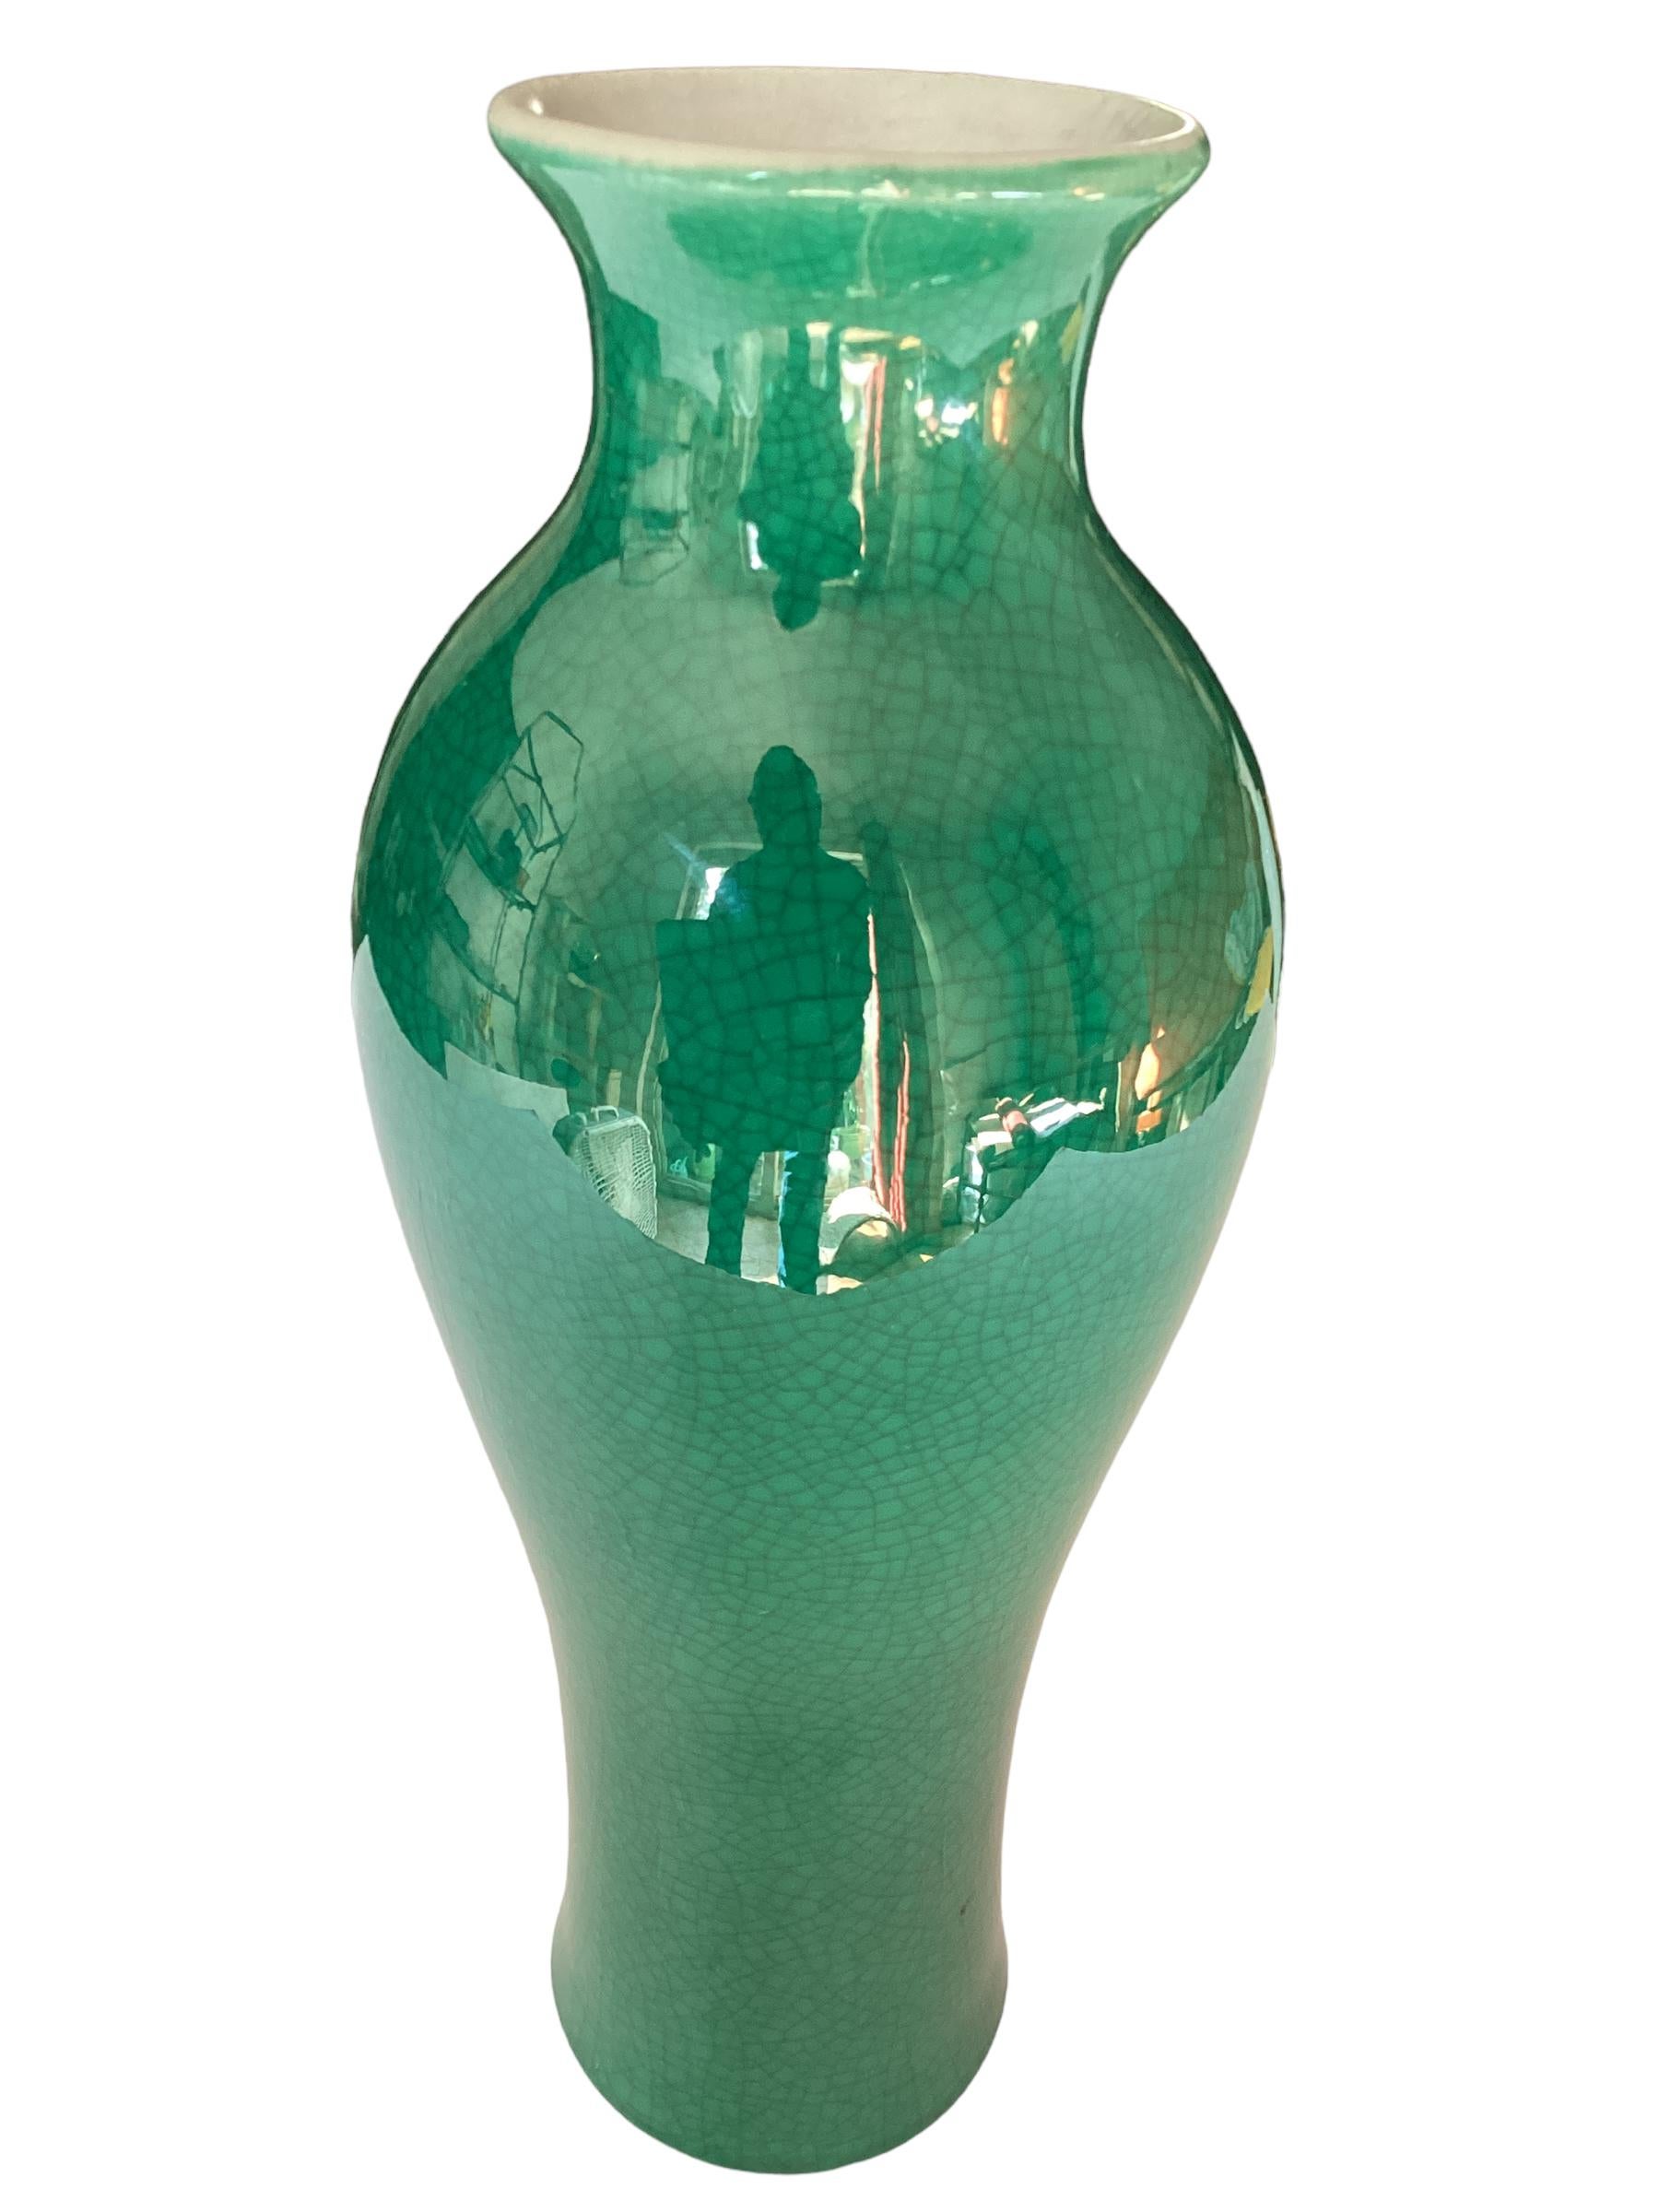 Antique Apple Green Chinese Crackle Vase.